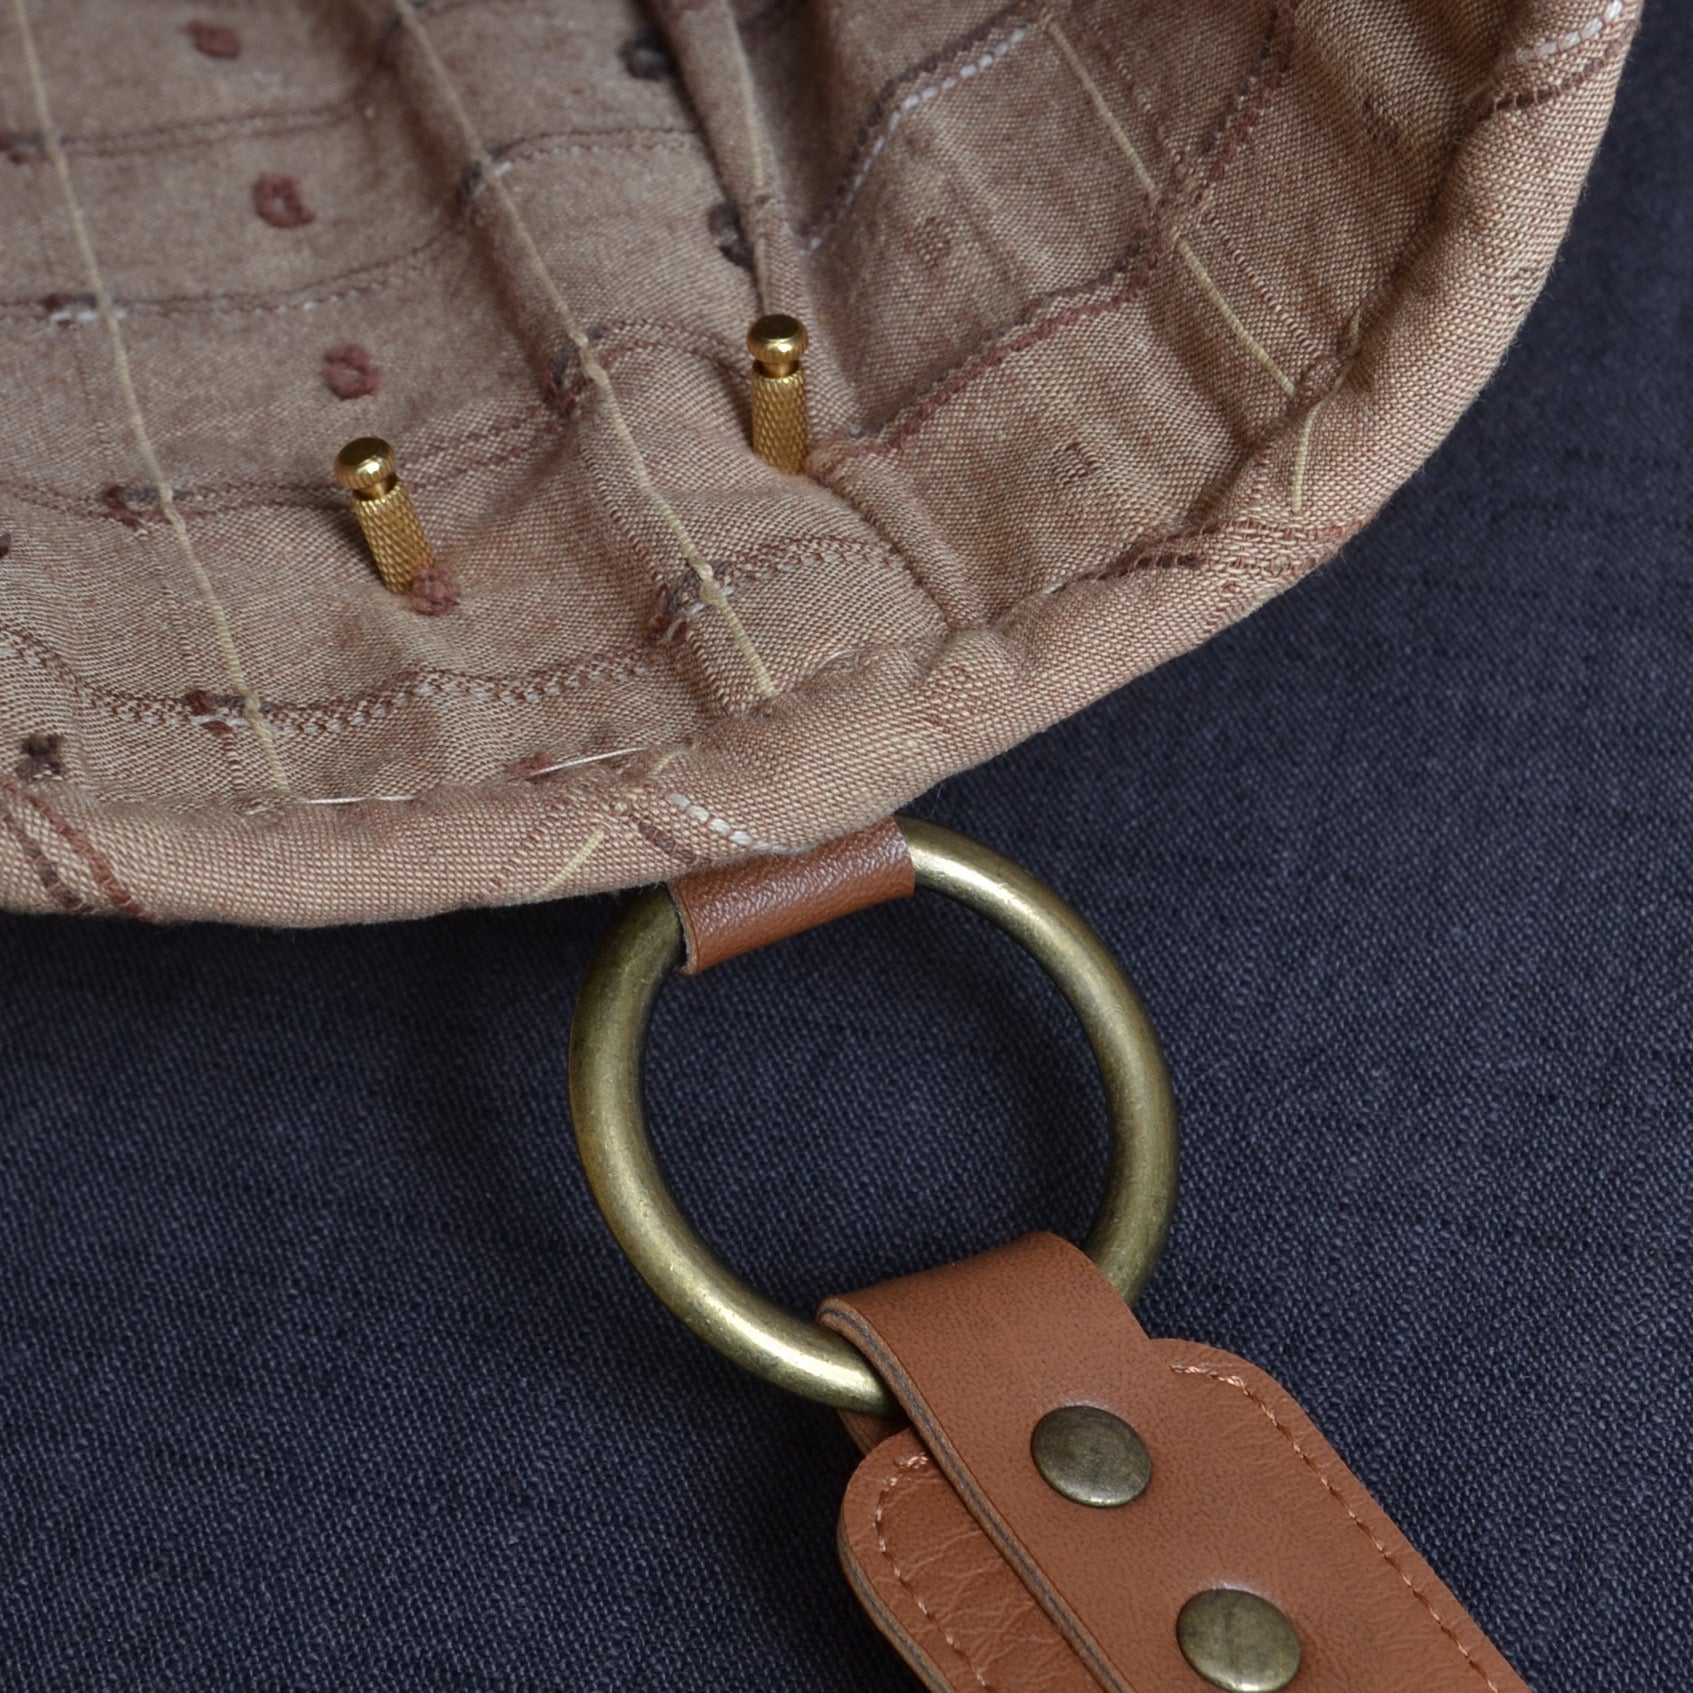 Fixing pins for securing bag handles when sewing into place